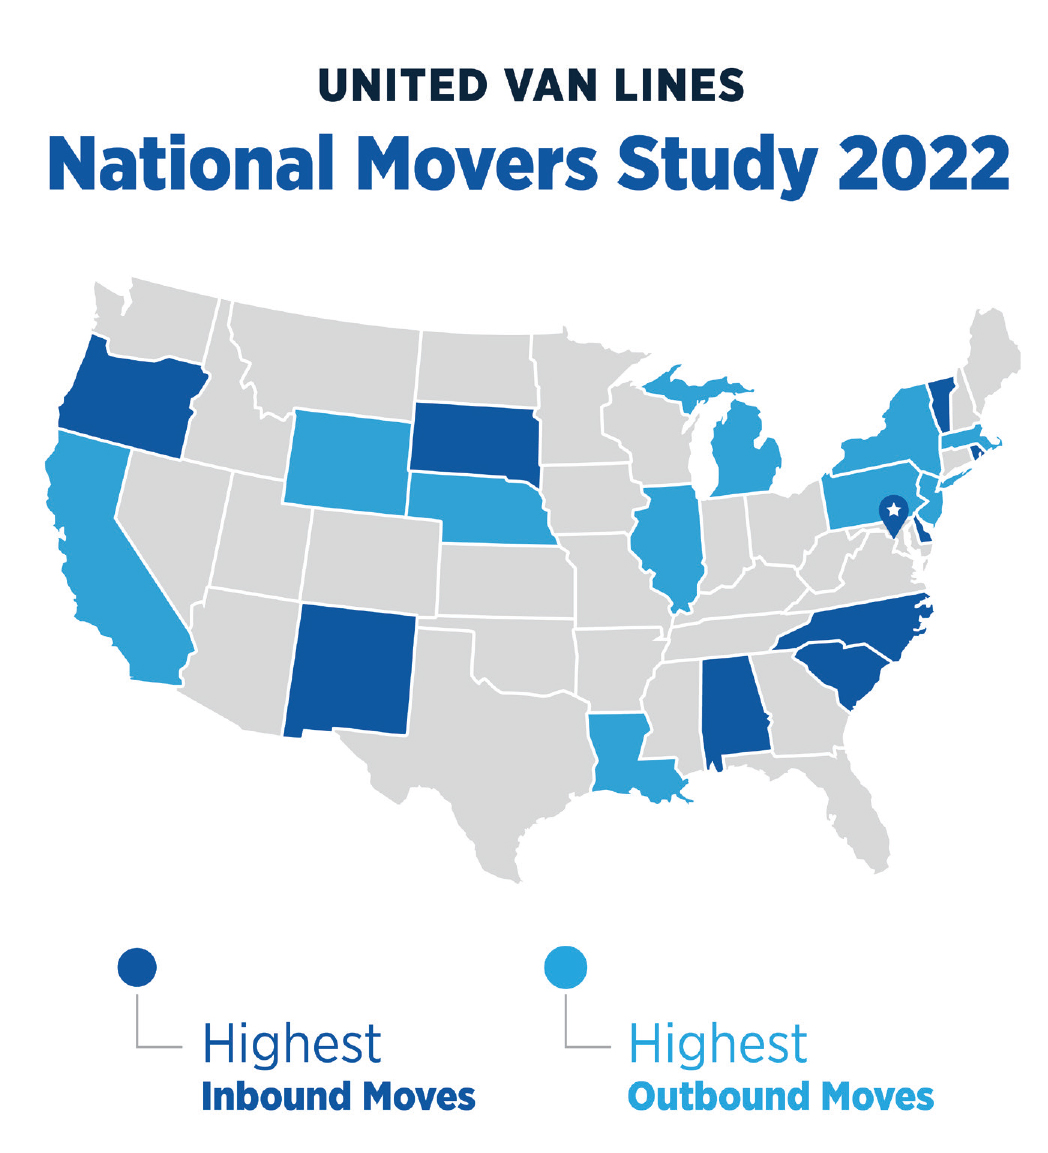 United Vans Lines National Movers Study 2022 - relocating Americans